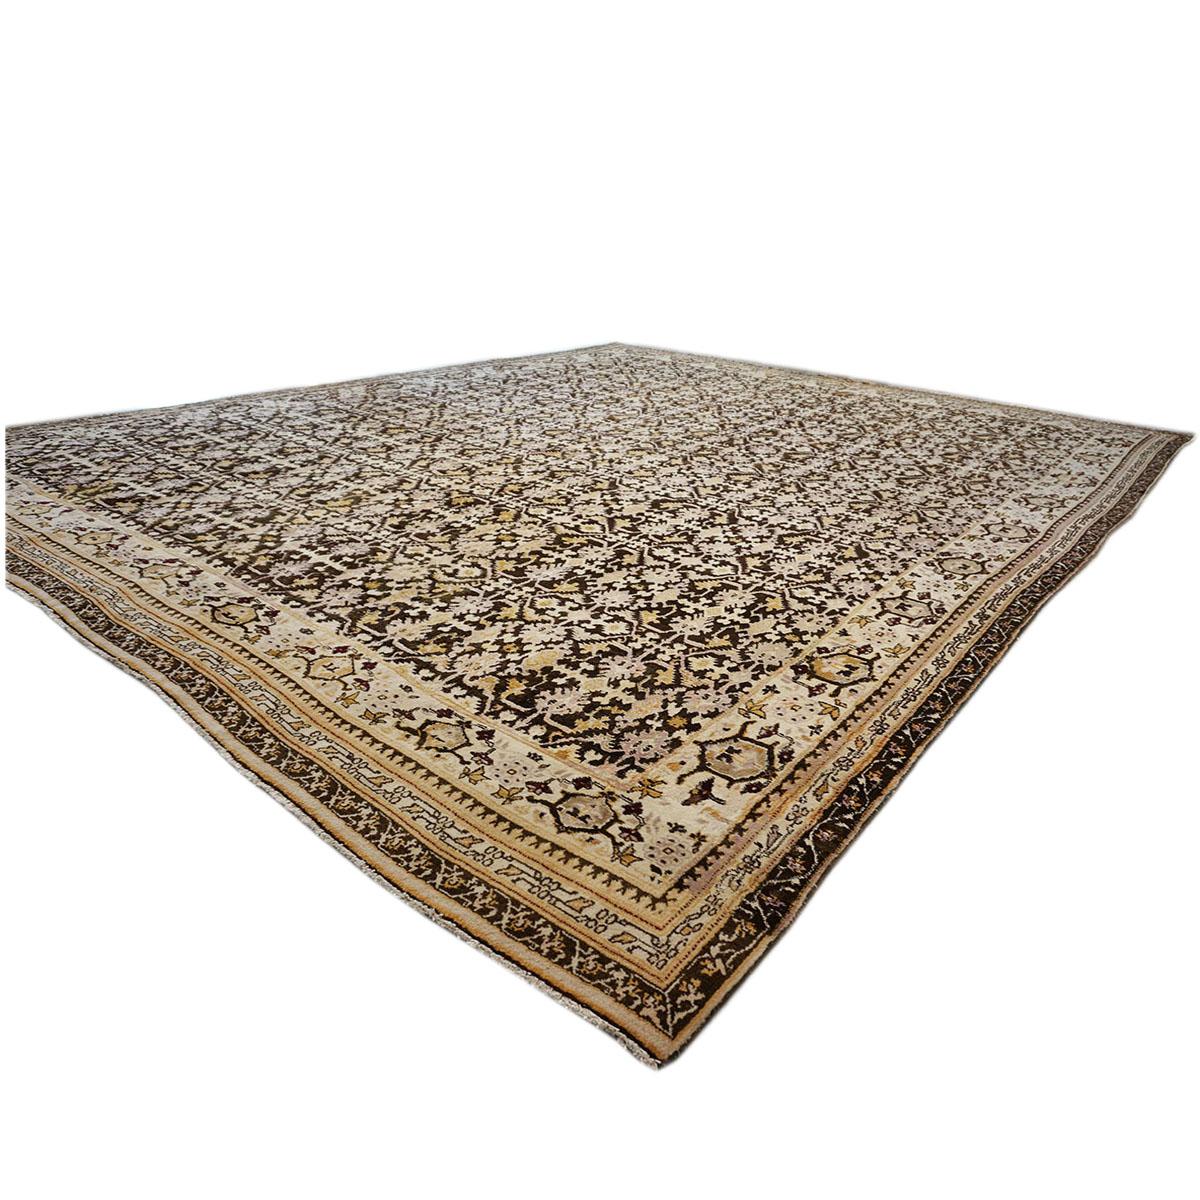 Early 20th Century 20th Century Antique Indian Agra 12x14 Brown & Ivory Handmade Area Rug For Sale